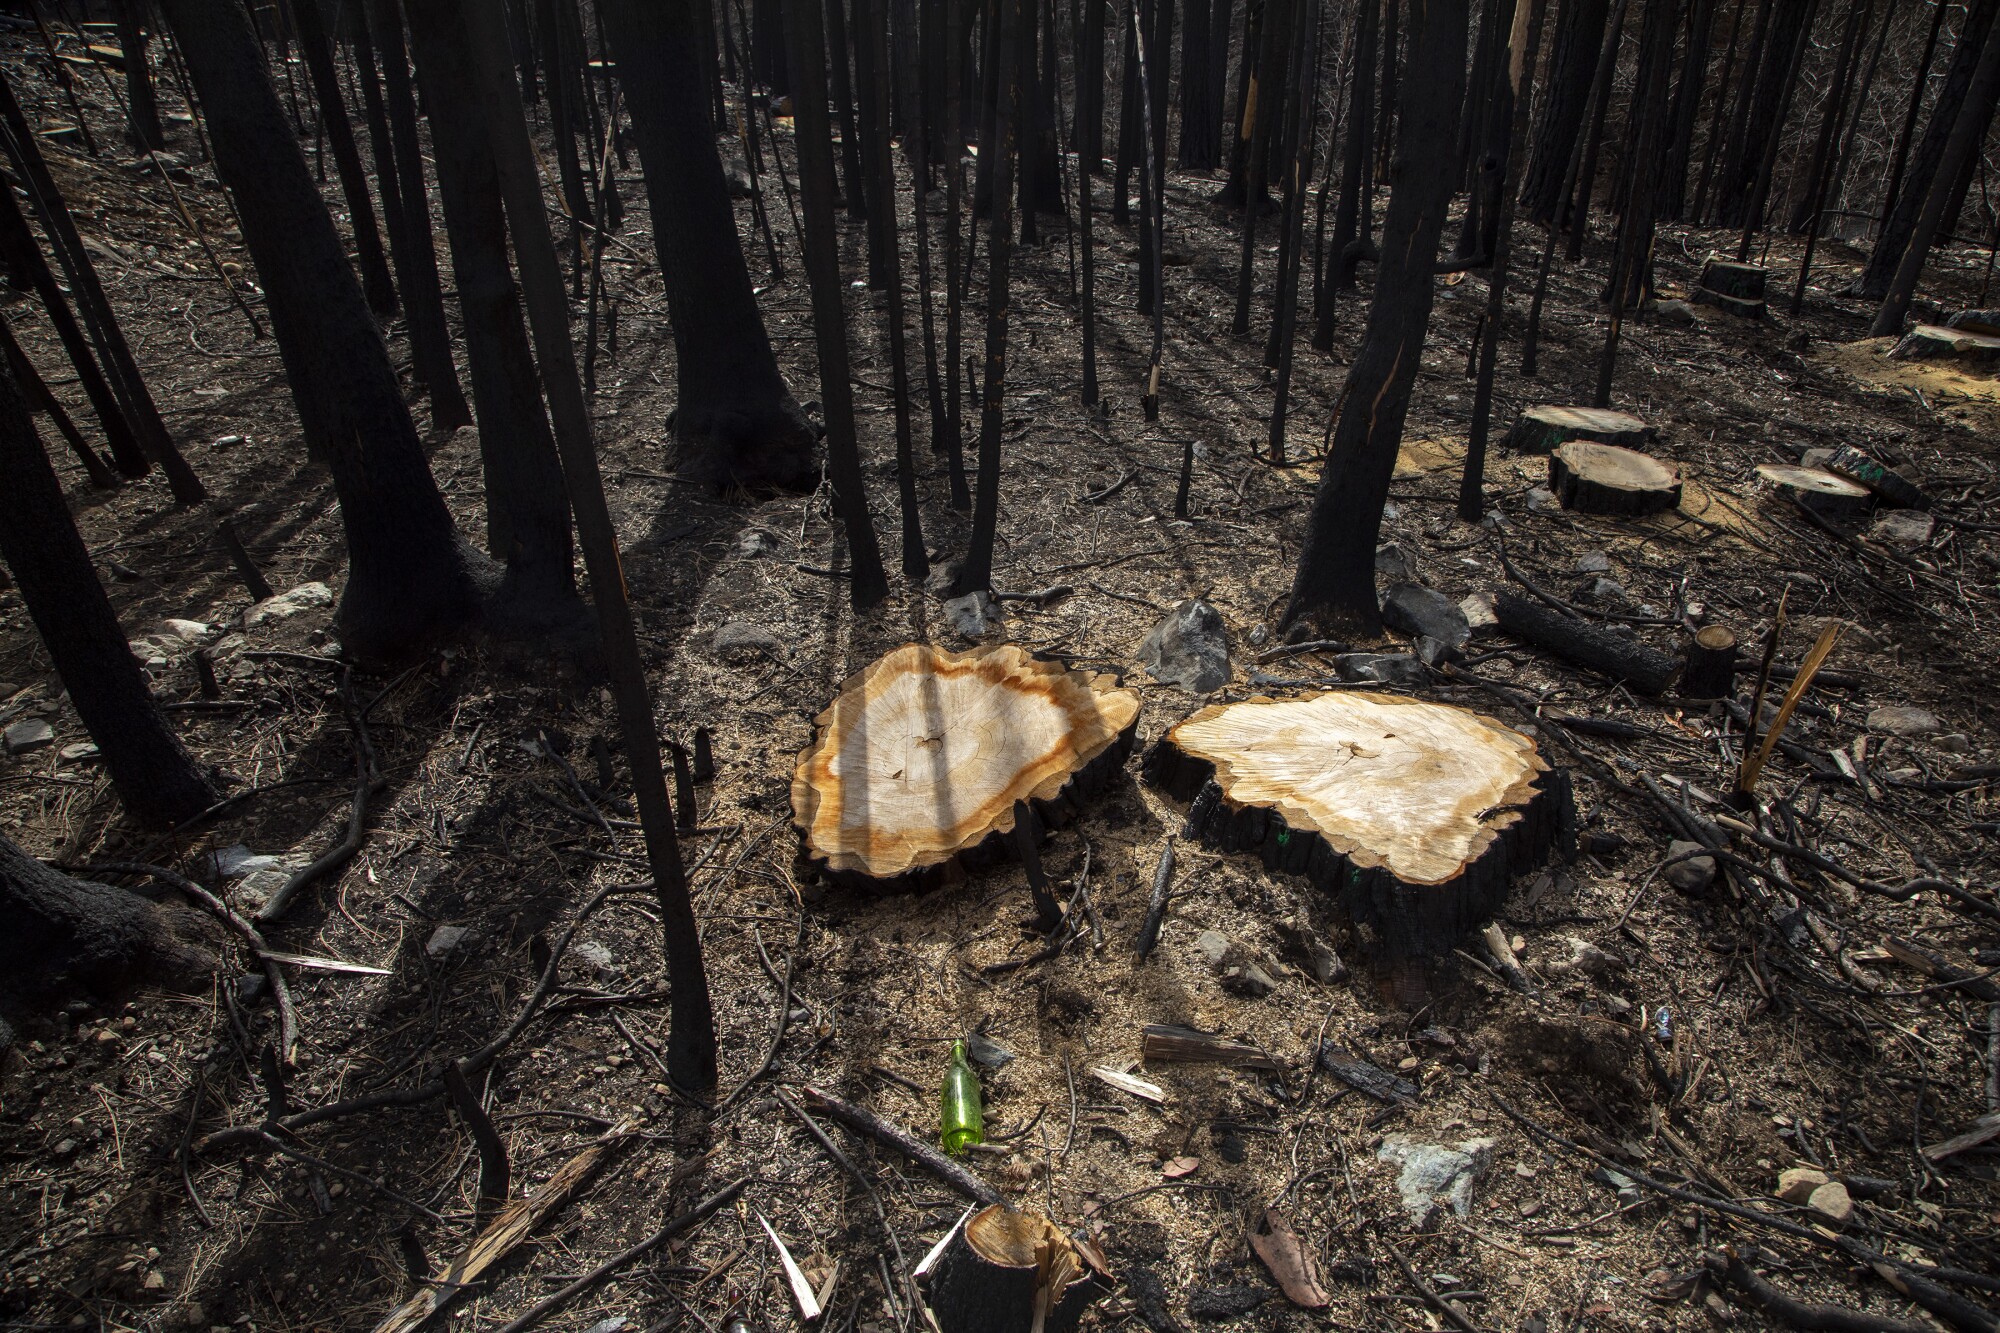 Freshly cut stumps in a burned forest.